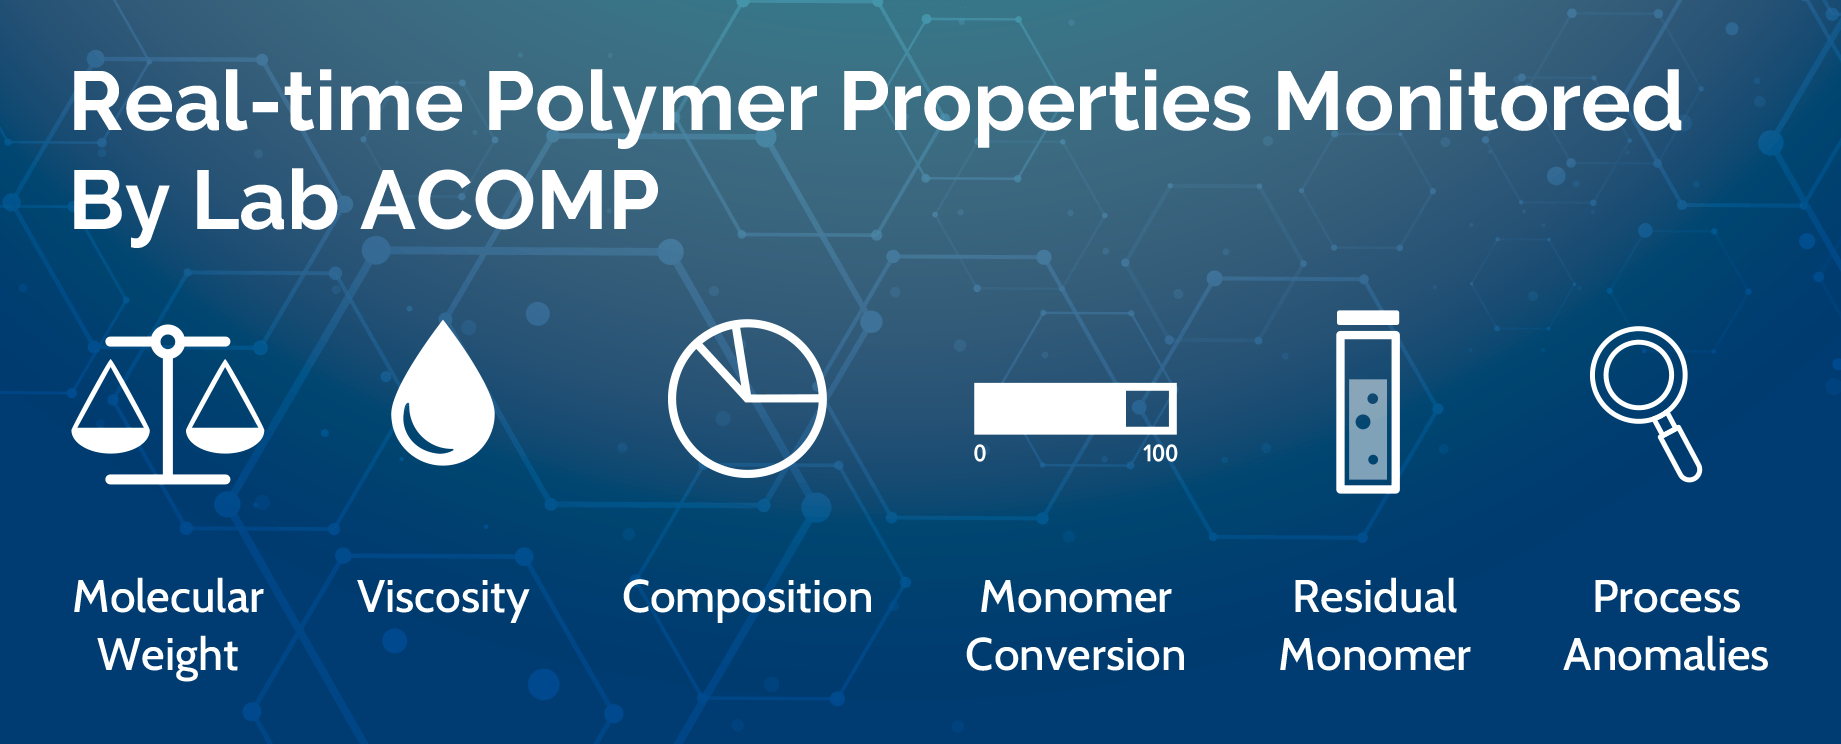 Properties Monitored by Lab ACOMP - Fluence Analytics